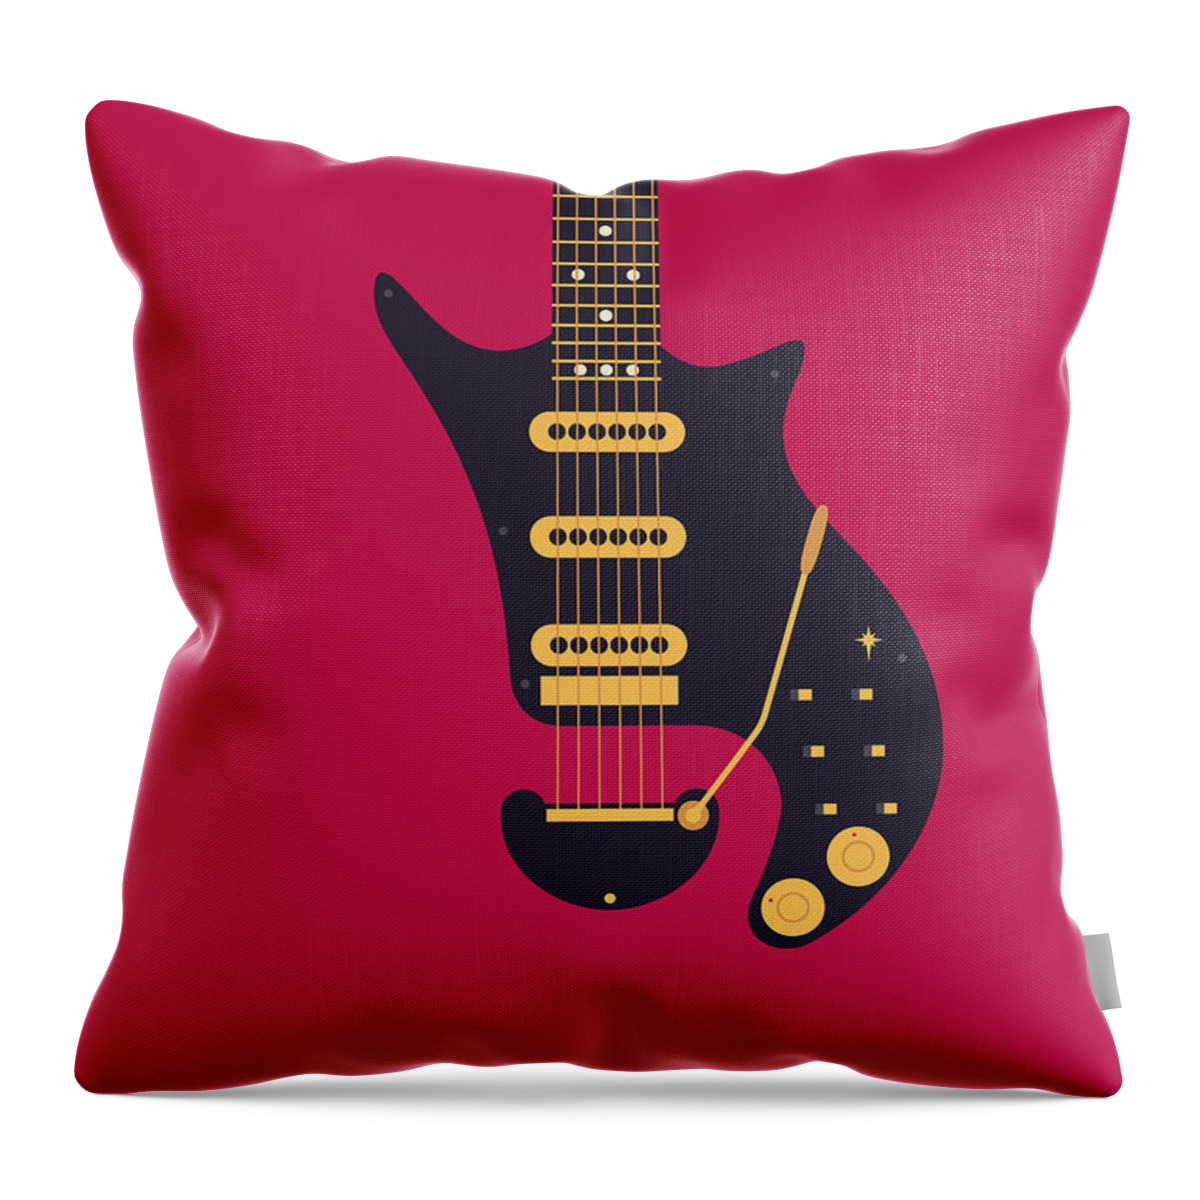 Guitar Throw Pillow featuring the digital art Glam Rock 70s Guitar - Burgundy by Organic Synthesis